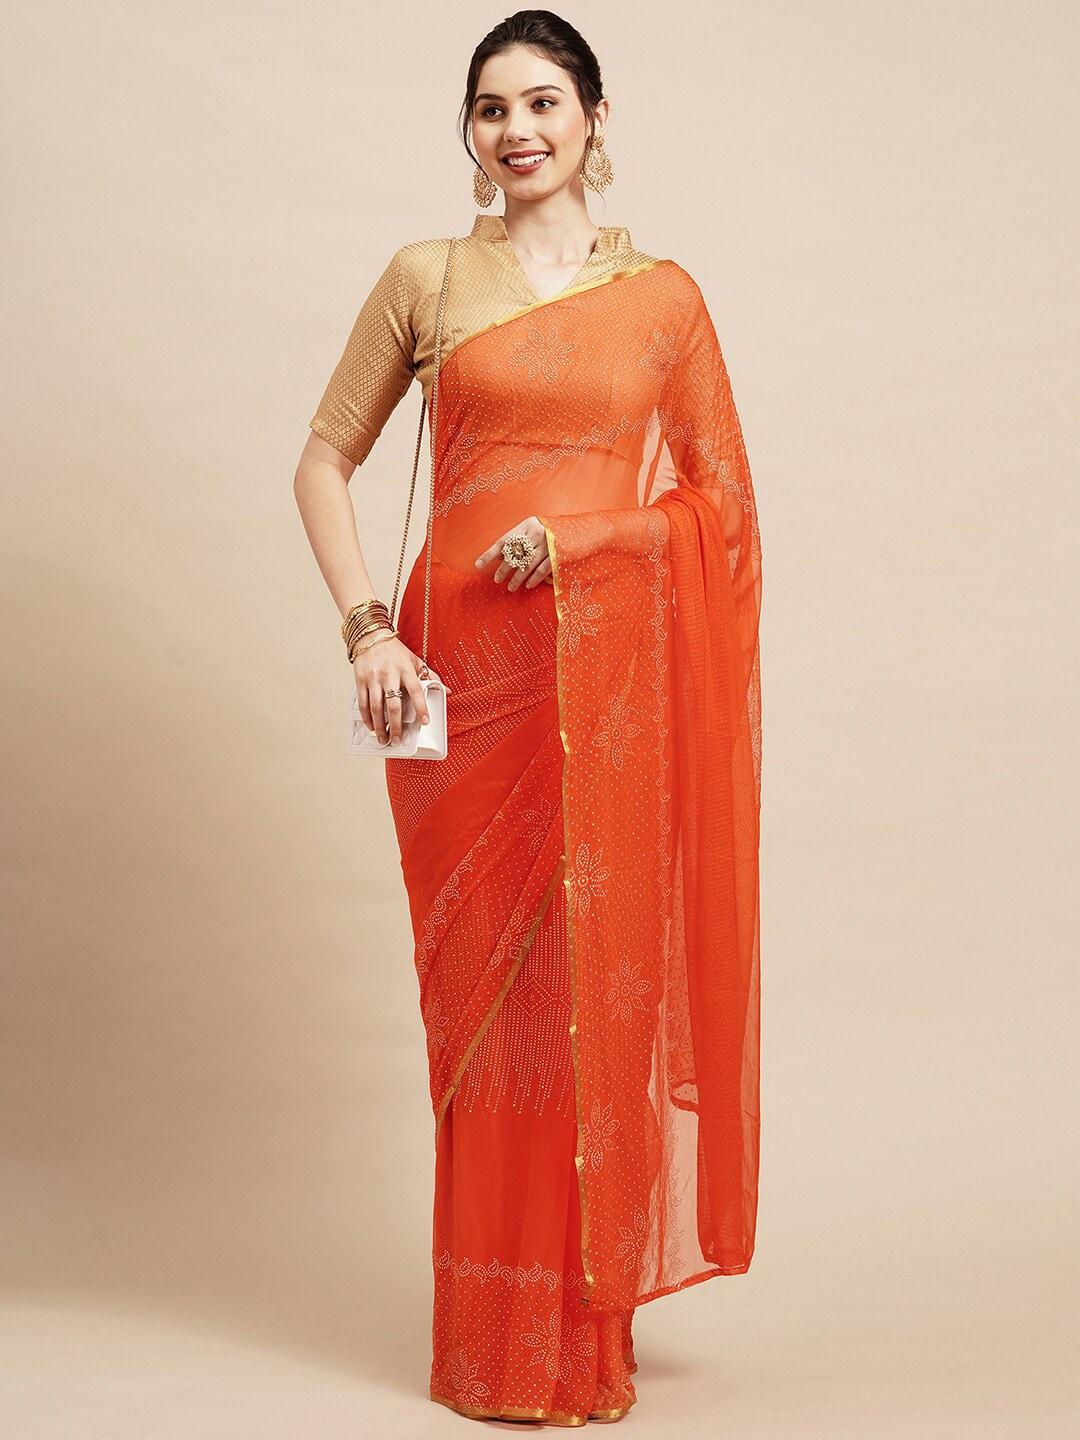 Saree mall Red & Gold-Toned Floral Zari Sarees with Matching Blouse